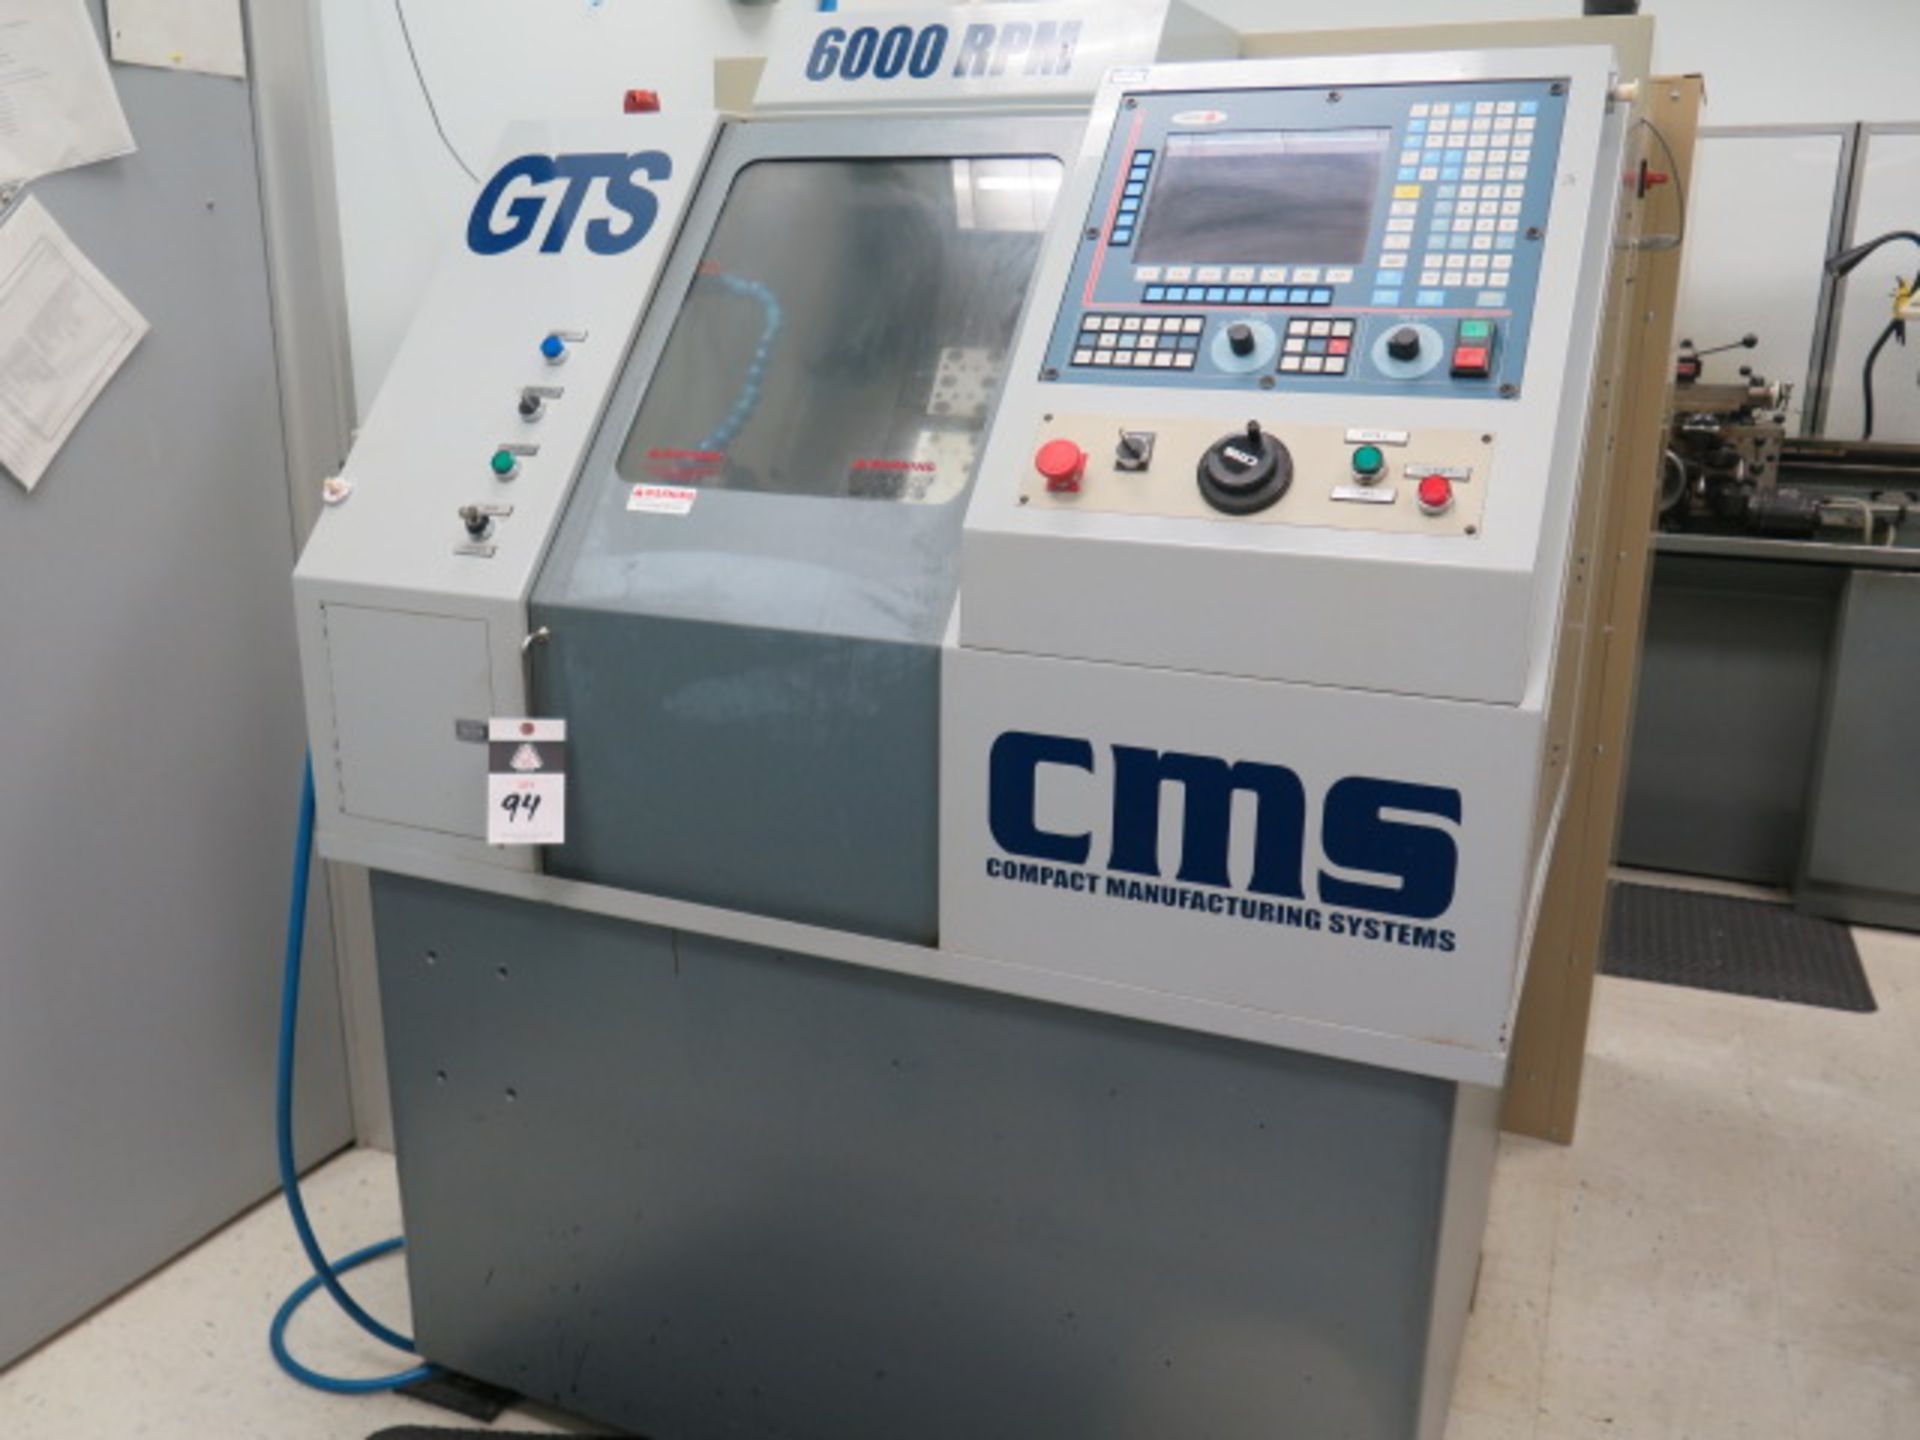 CMS mdl. GTD CNC Cross Slide Lathe w/ Fagor CNC Controls, 6000 RPM, 5C Collet Closer, SOLD AS IS - Image 2 of 14